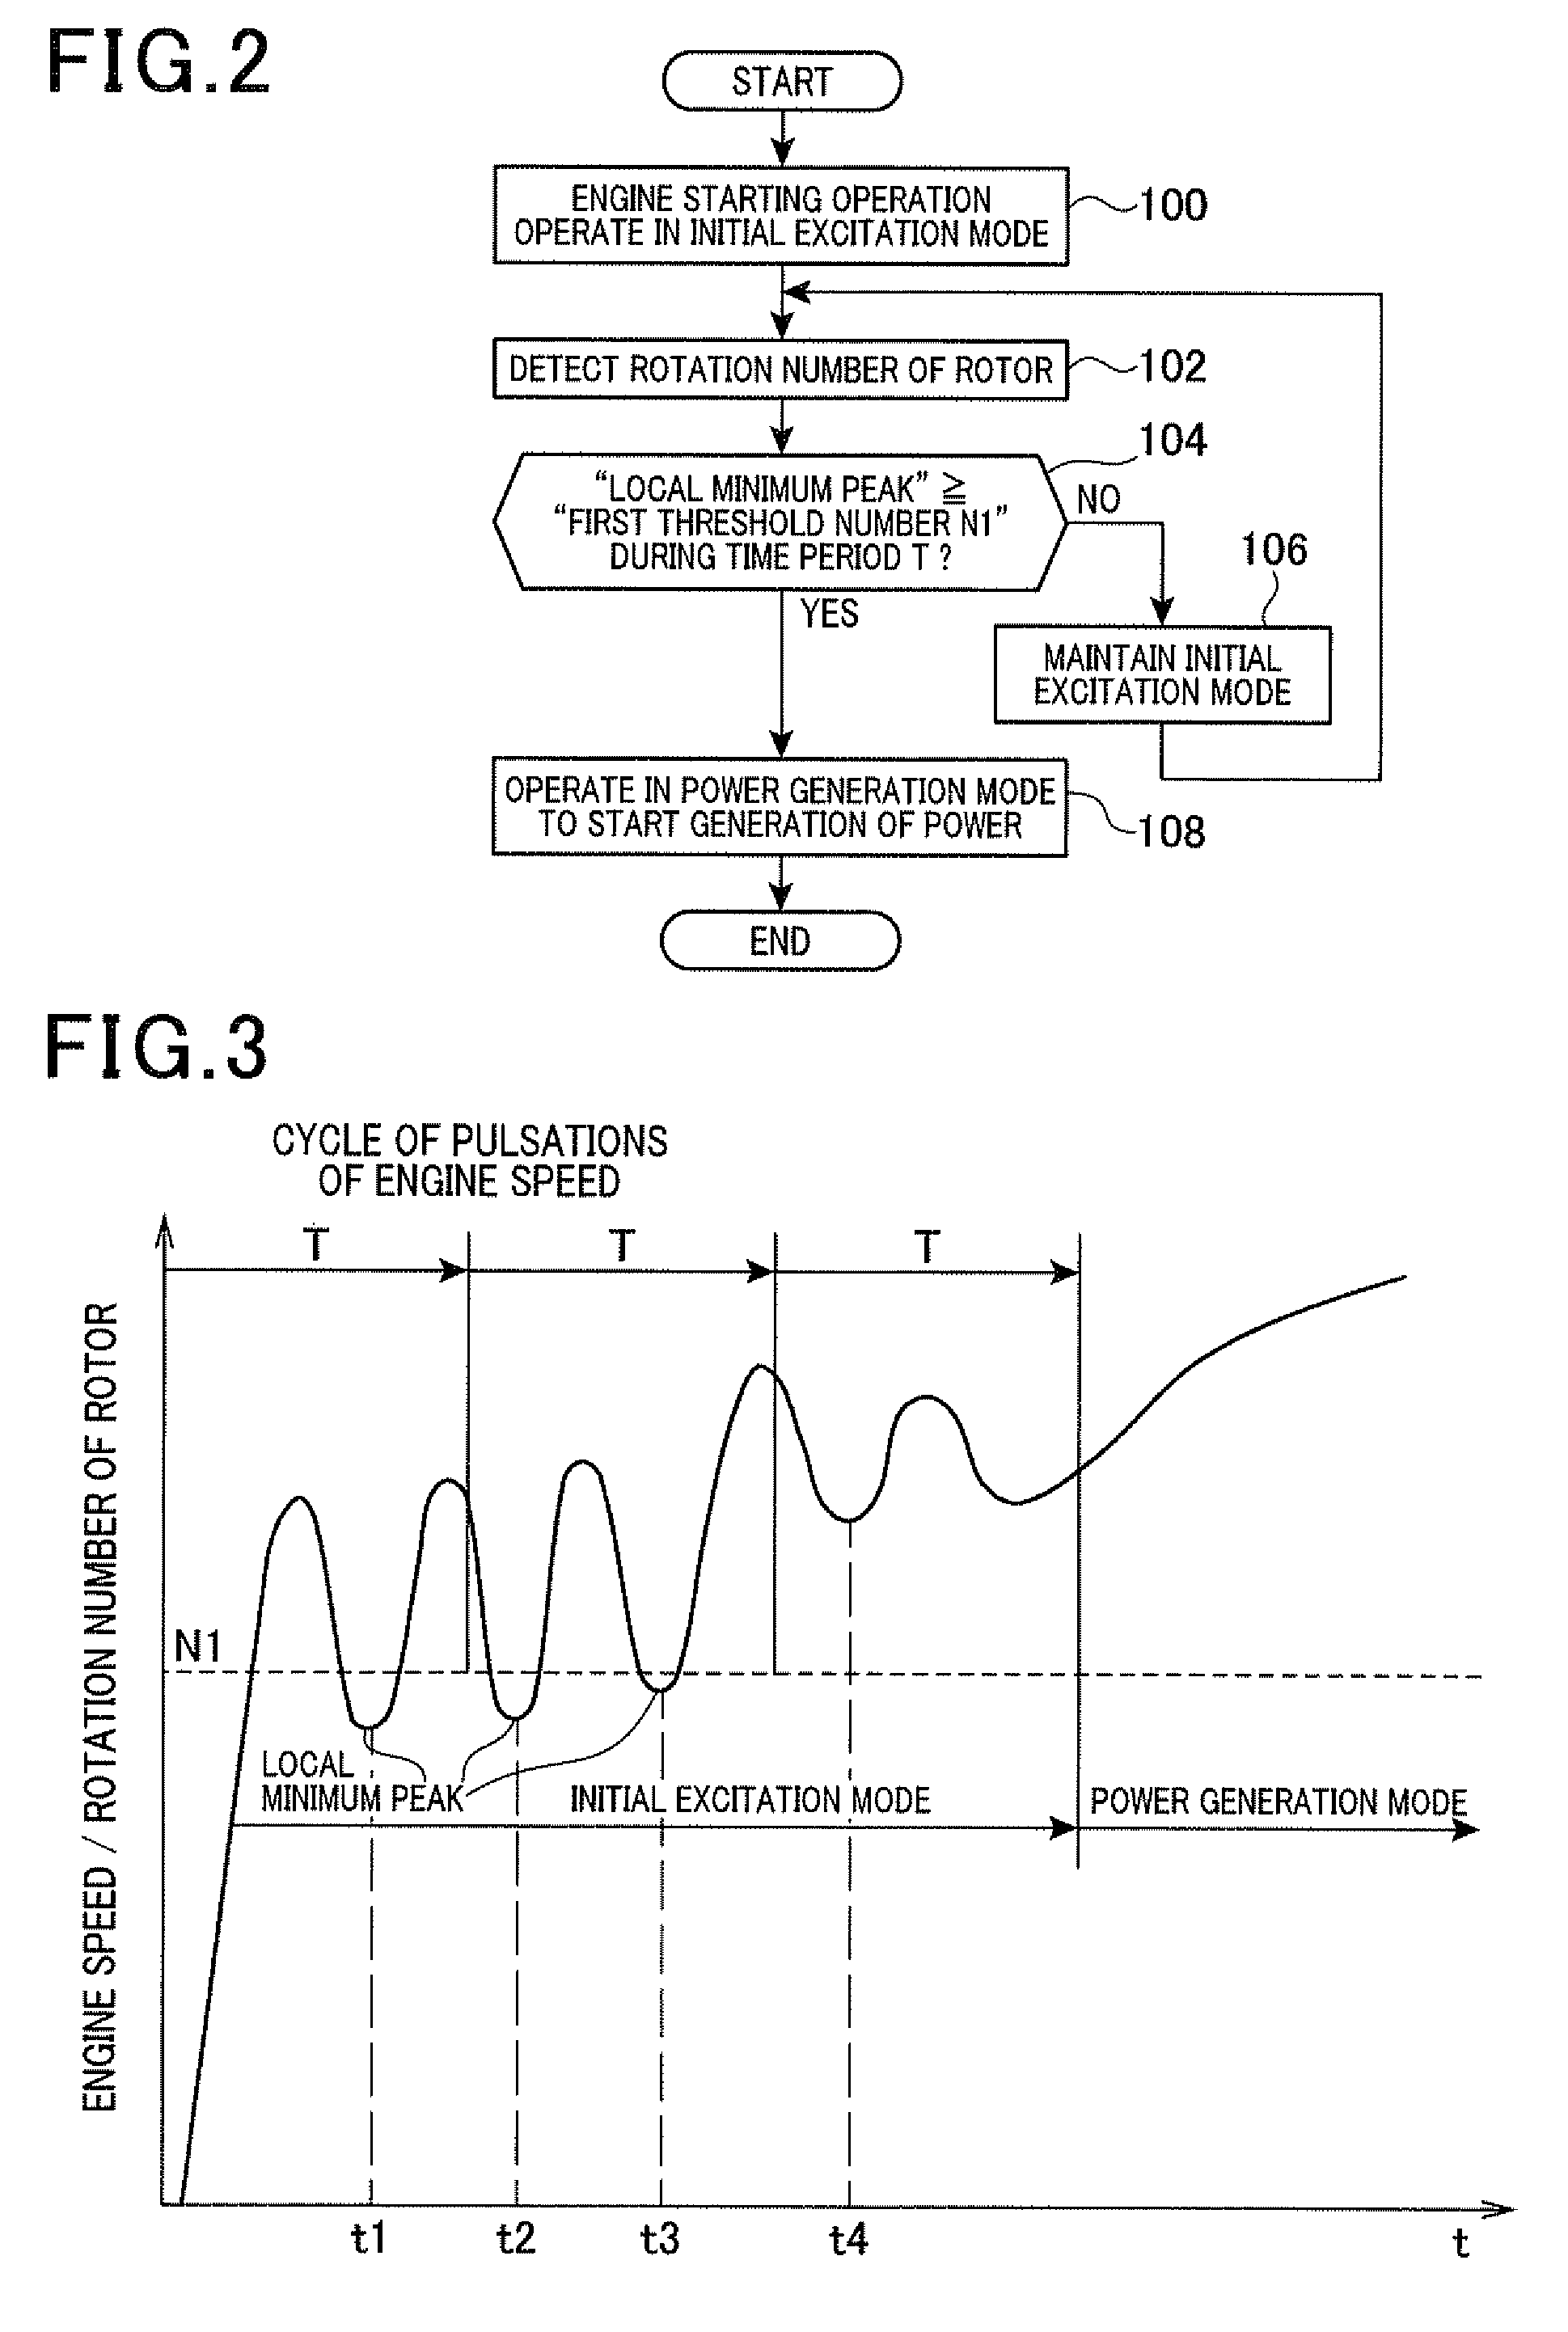 Controller for controlling power generator driven by rotational power of engine